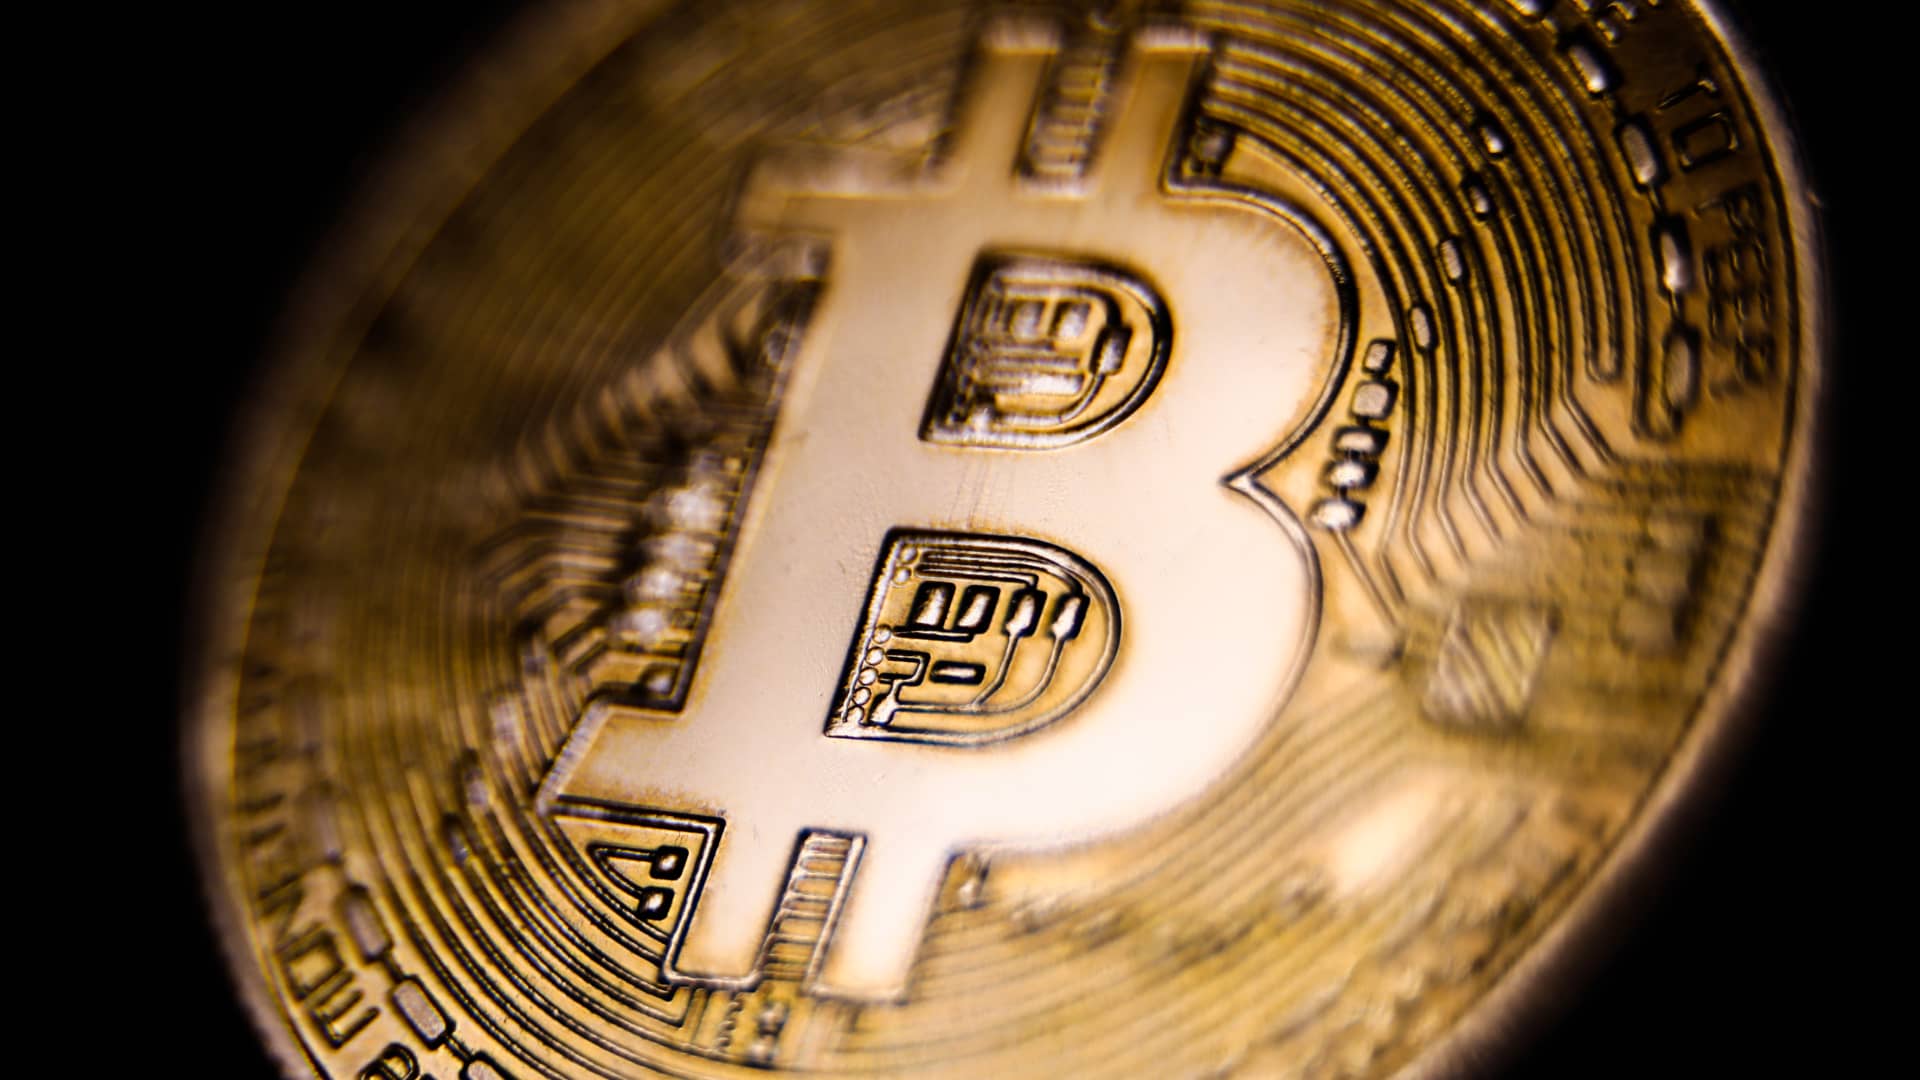 Bitcoin drops underneath ,000 over the weekend, extending Friday’s losses